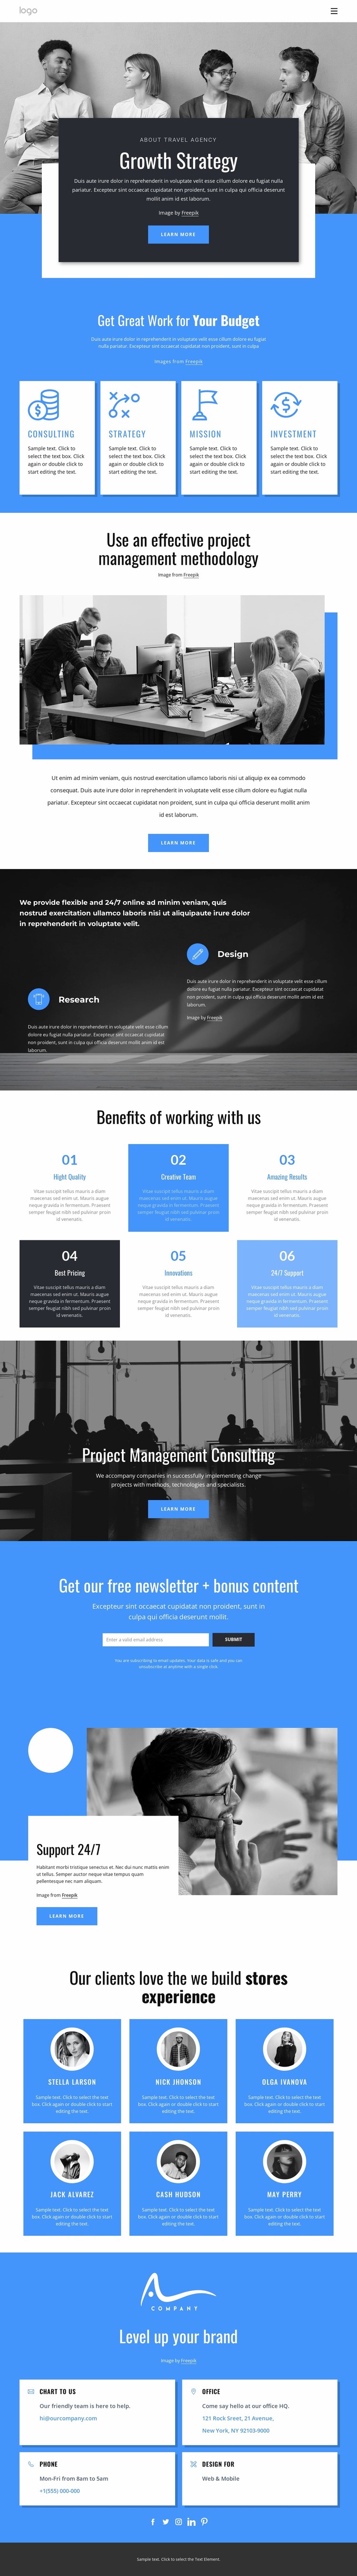 Growth strategy consulting company Website Mockup